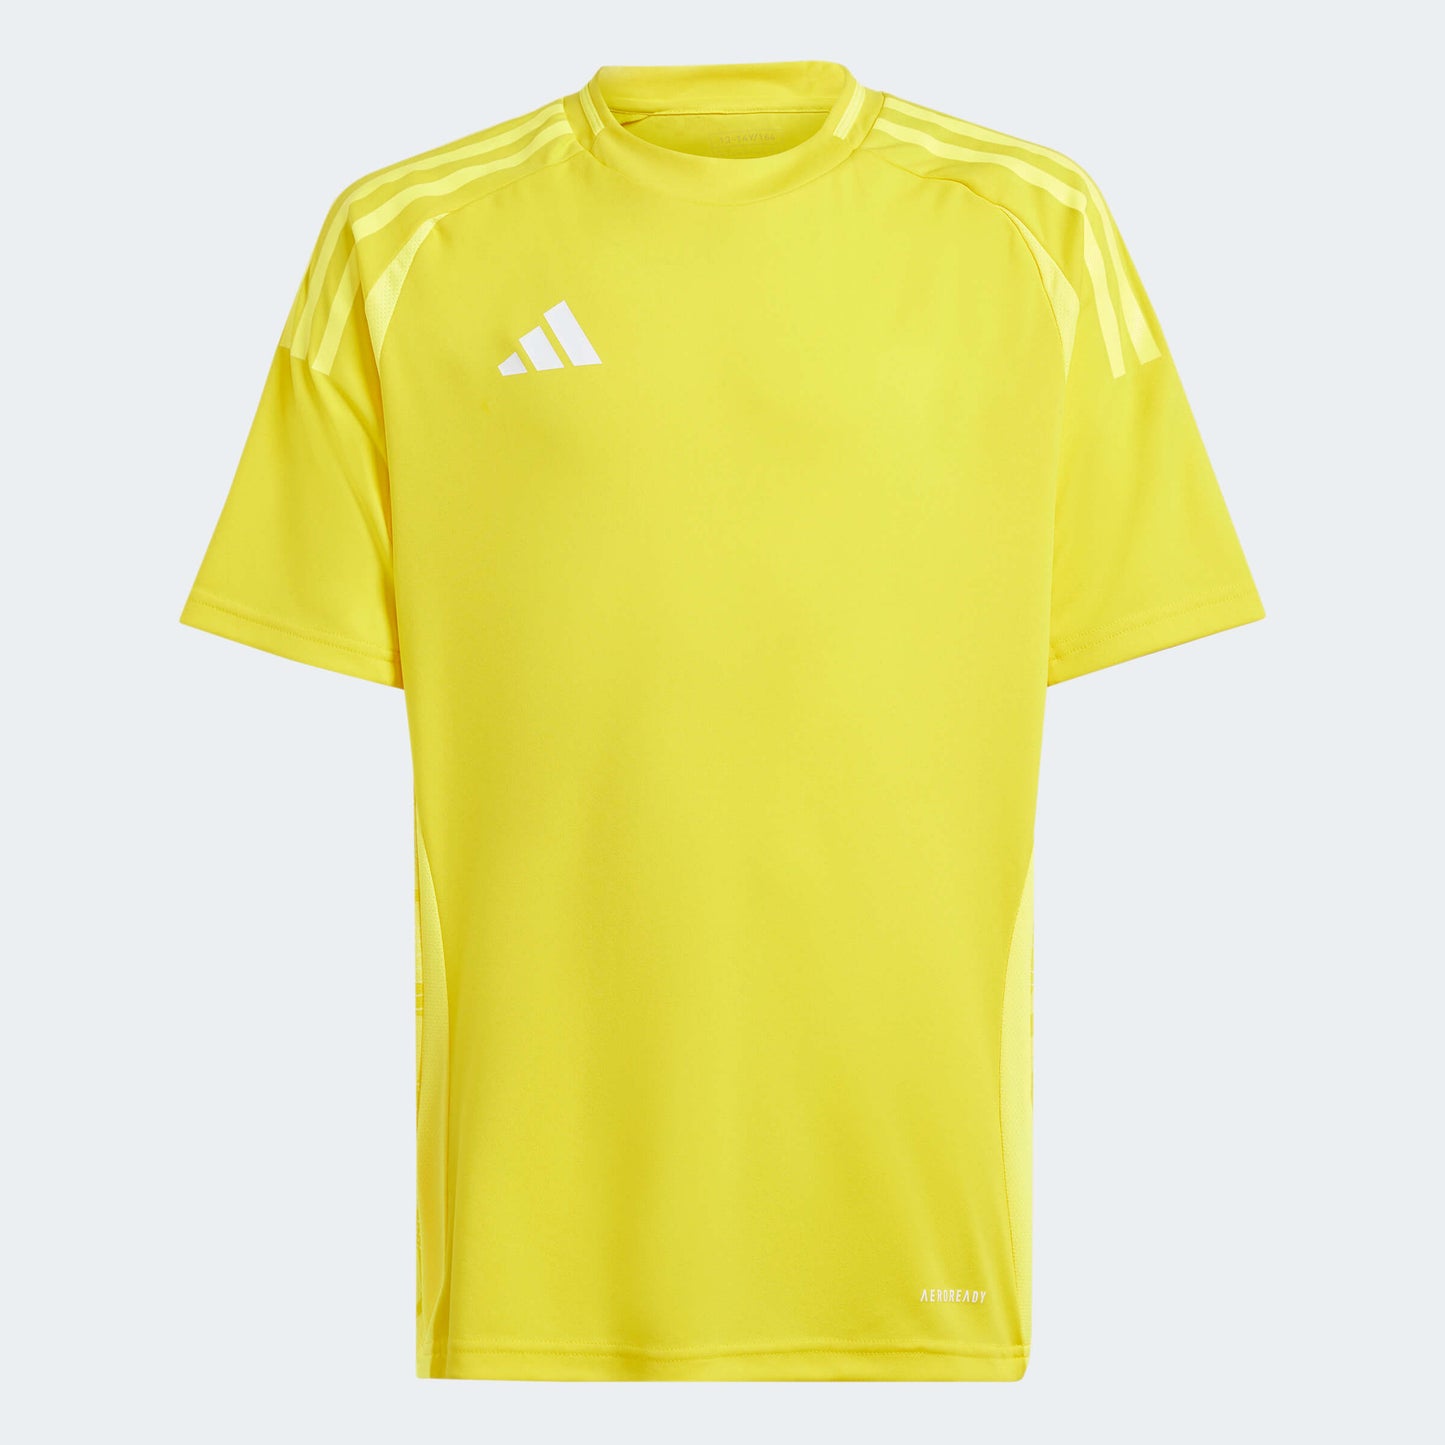 adidas YOUTH Tiro24 Competition Match Jersey Team Yellow (Front)